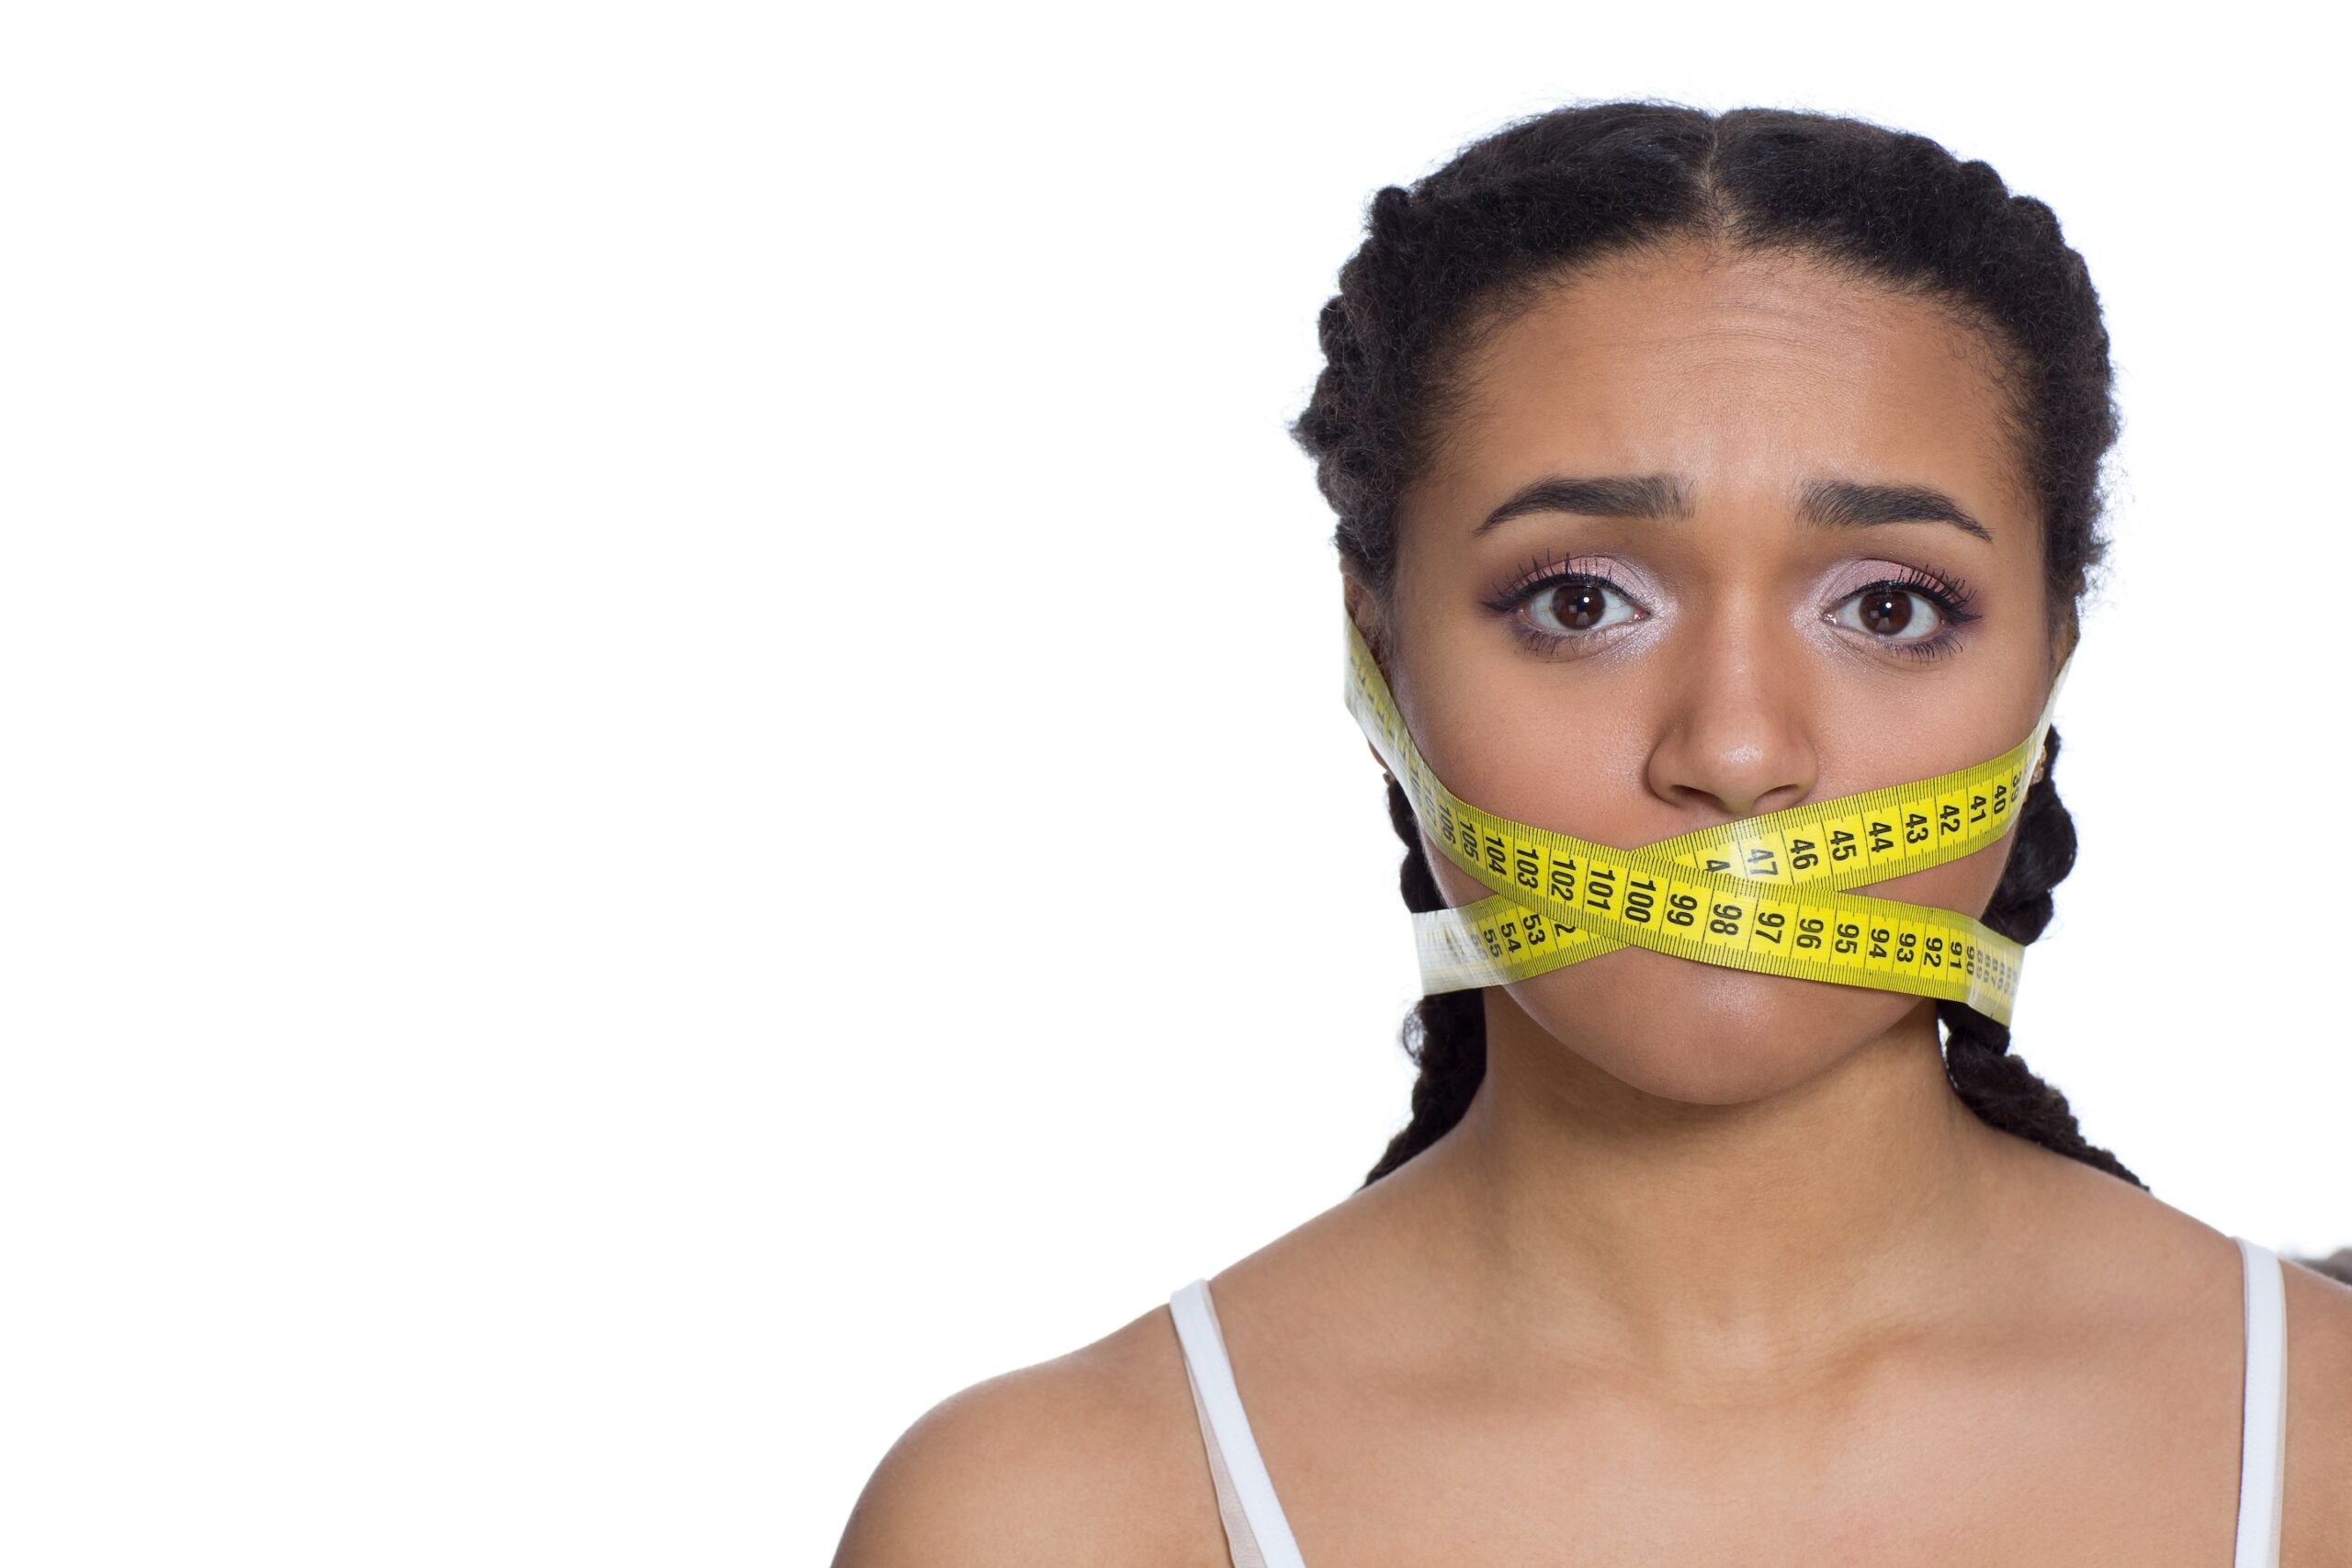 Eating Disorders in the Black Community